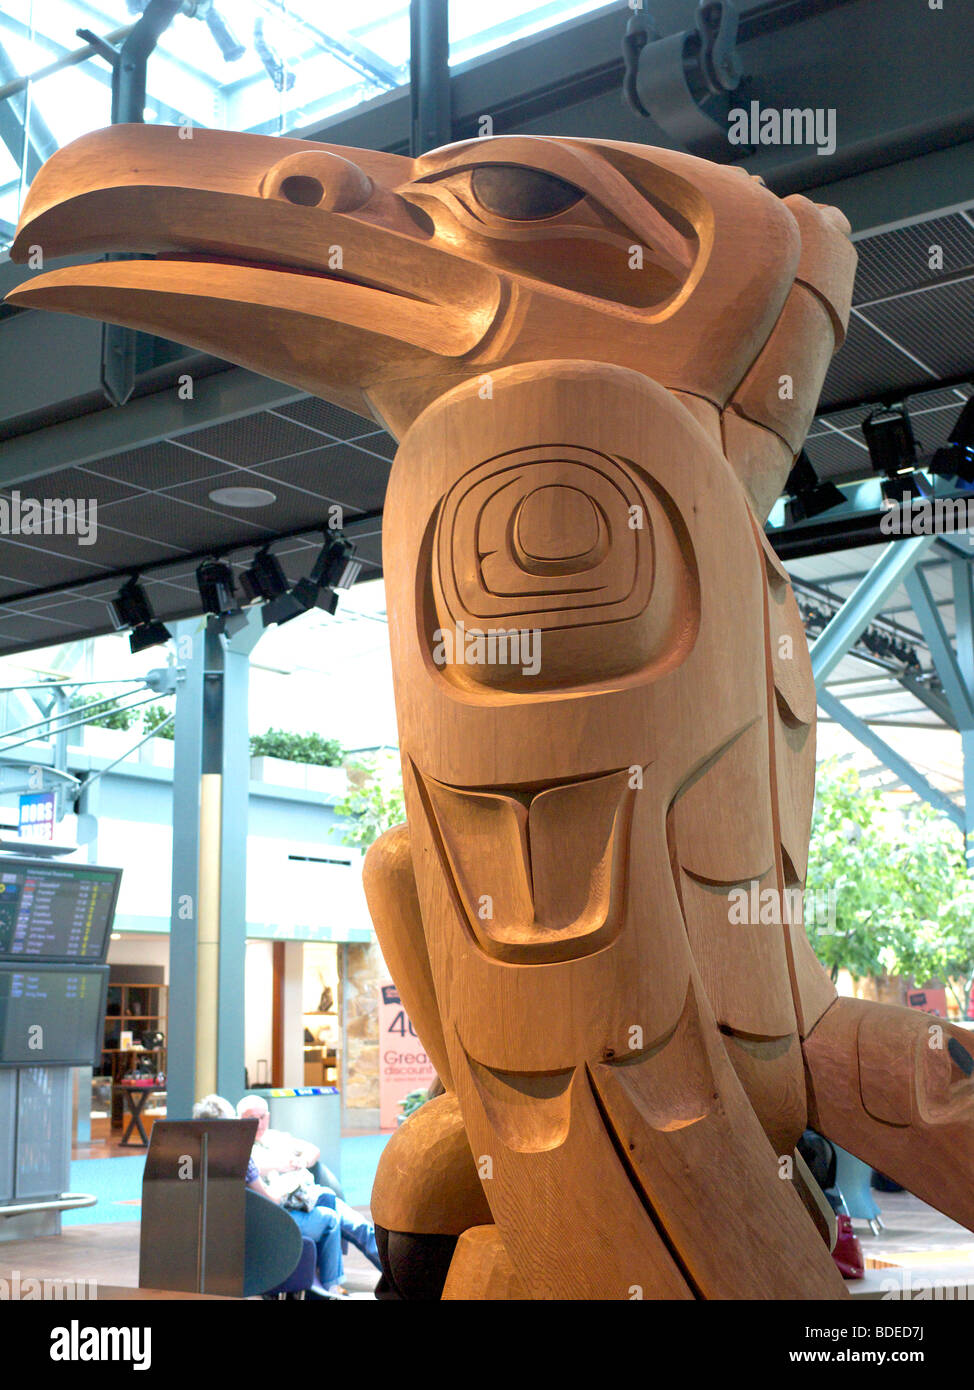 Gigantic Wooden Sculptures sited in Vancouver Airport, British Columbia, Canada Stock Photo